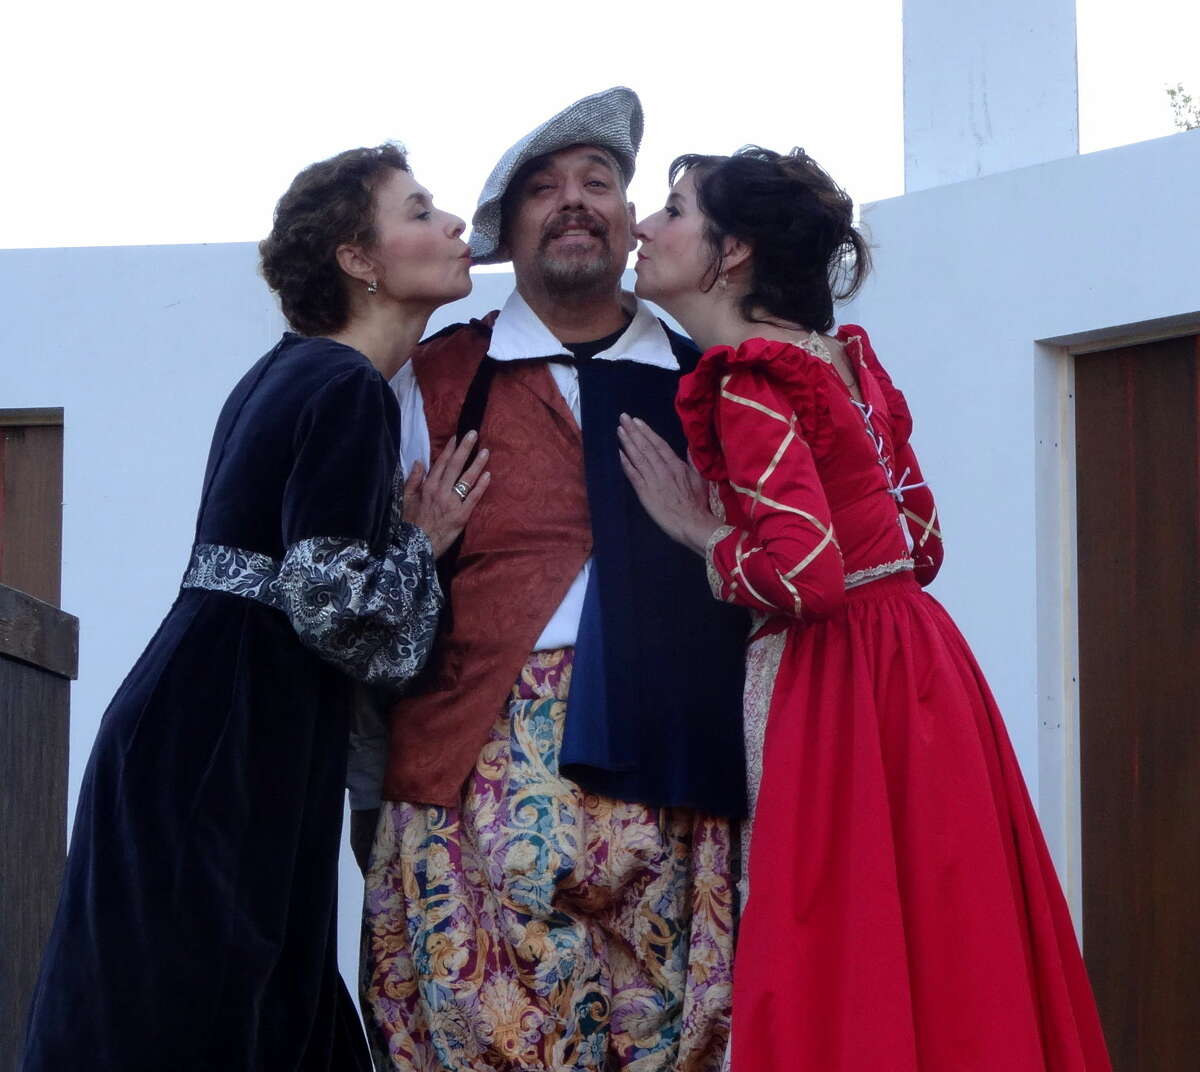 The two ladies of the title (Jessie Gilbert and Kimberley Lowden) have some fun with Stephen DiRocco as Falstaff in Curtain Call's Shakespeare on the Green presentation of "The Merry Wives of Windsor."